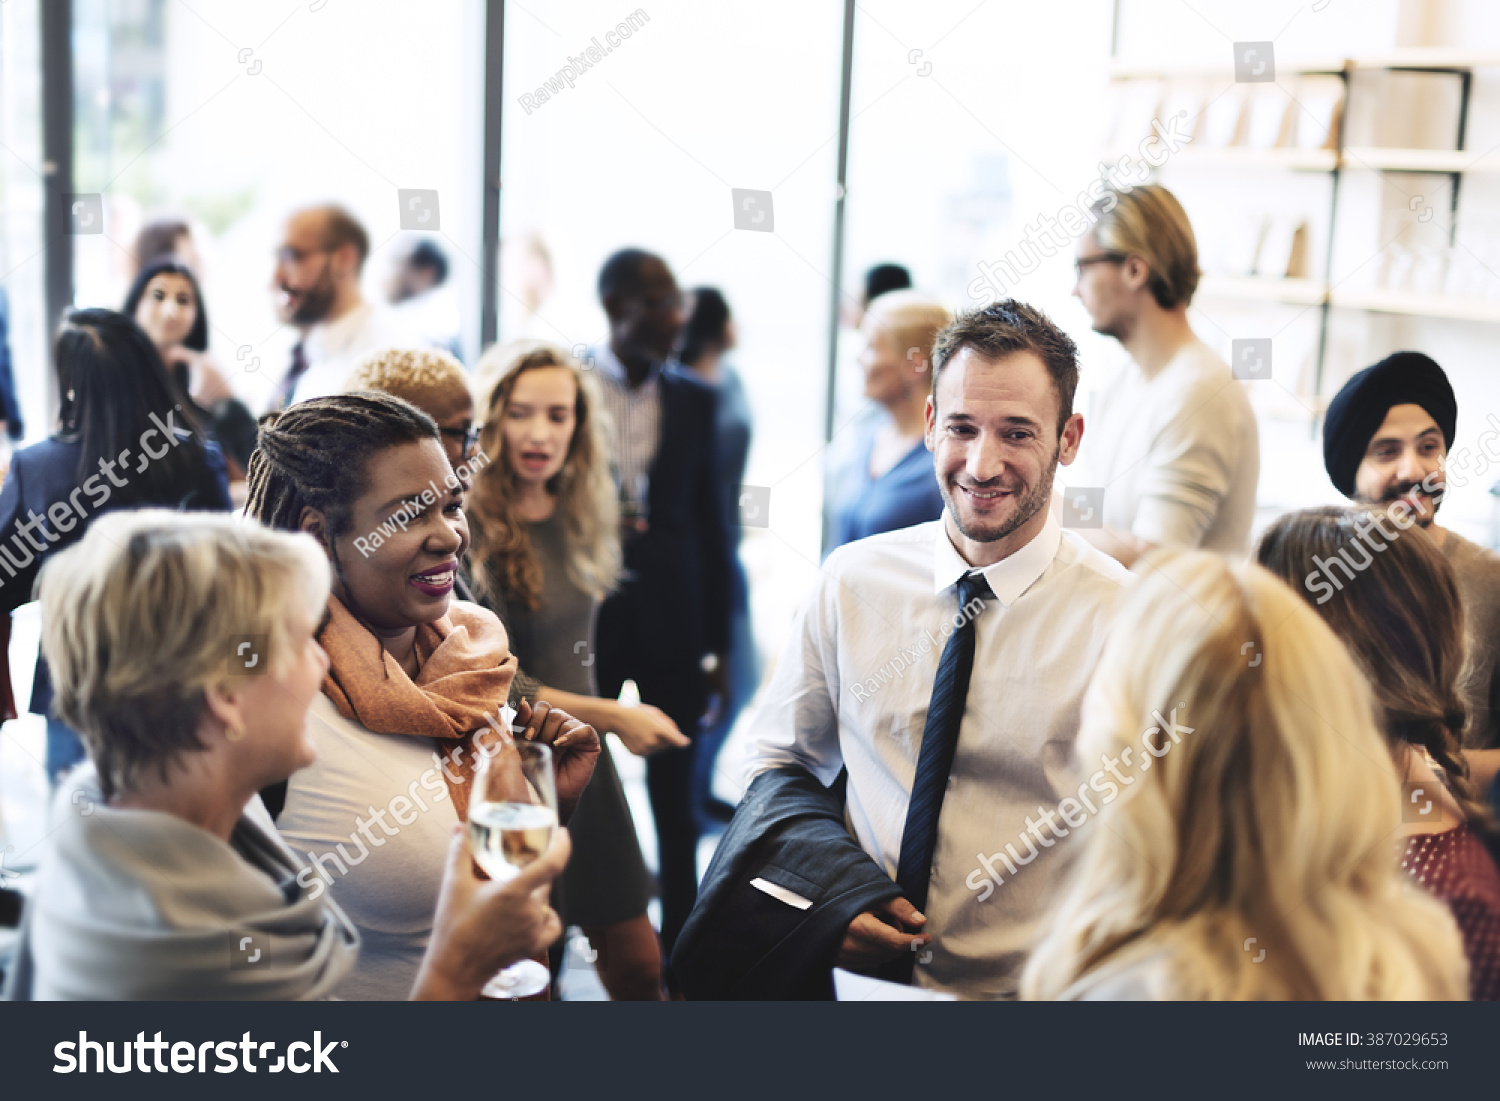 Diversity Group of People Meet up Party Concept #387029653